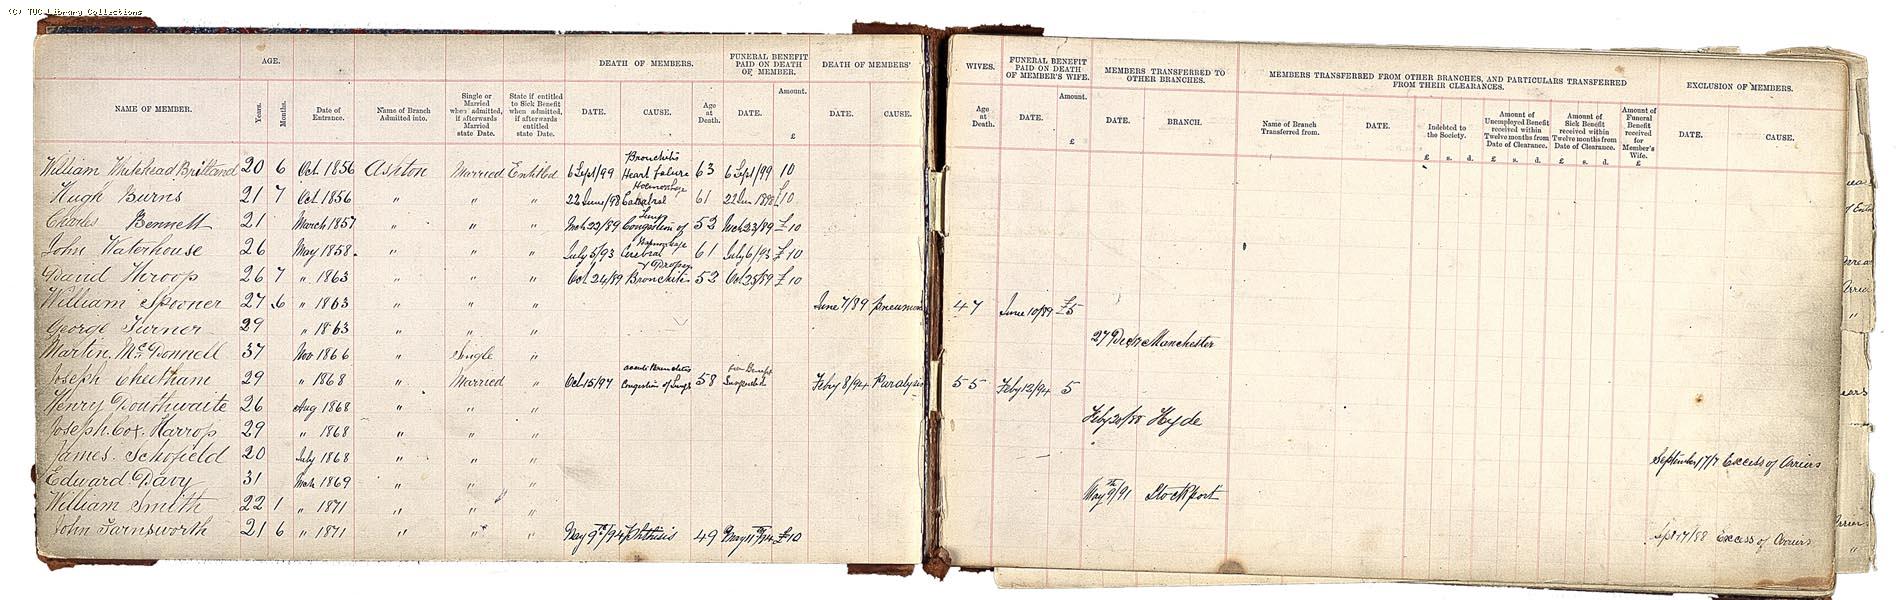 Registration book of the Ashton under Lyne branch of the National Amalgamated Society of Operative House and Ship Painters, c.1899